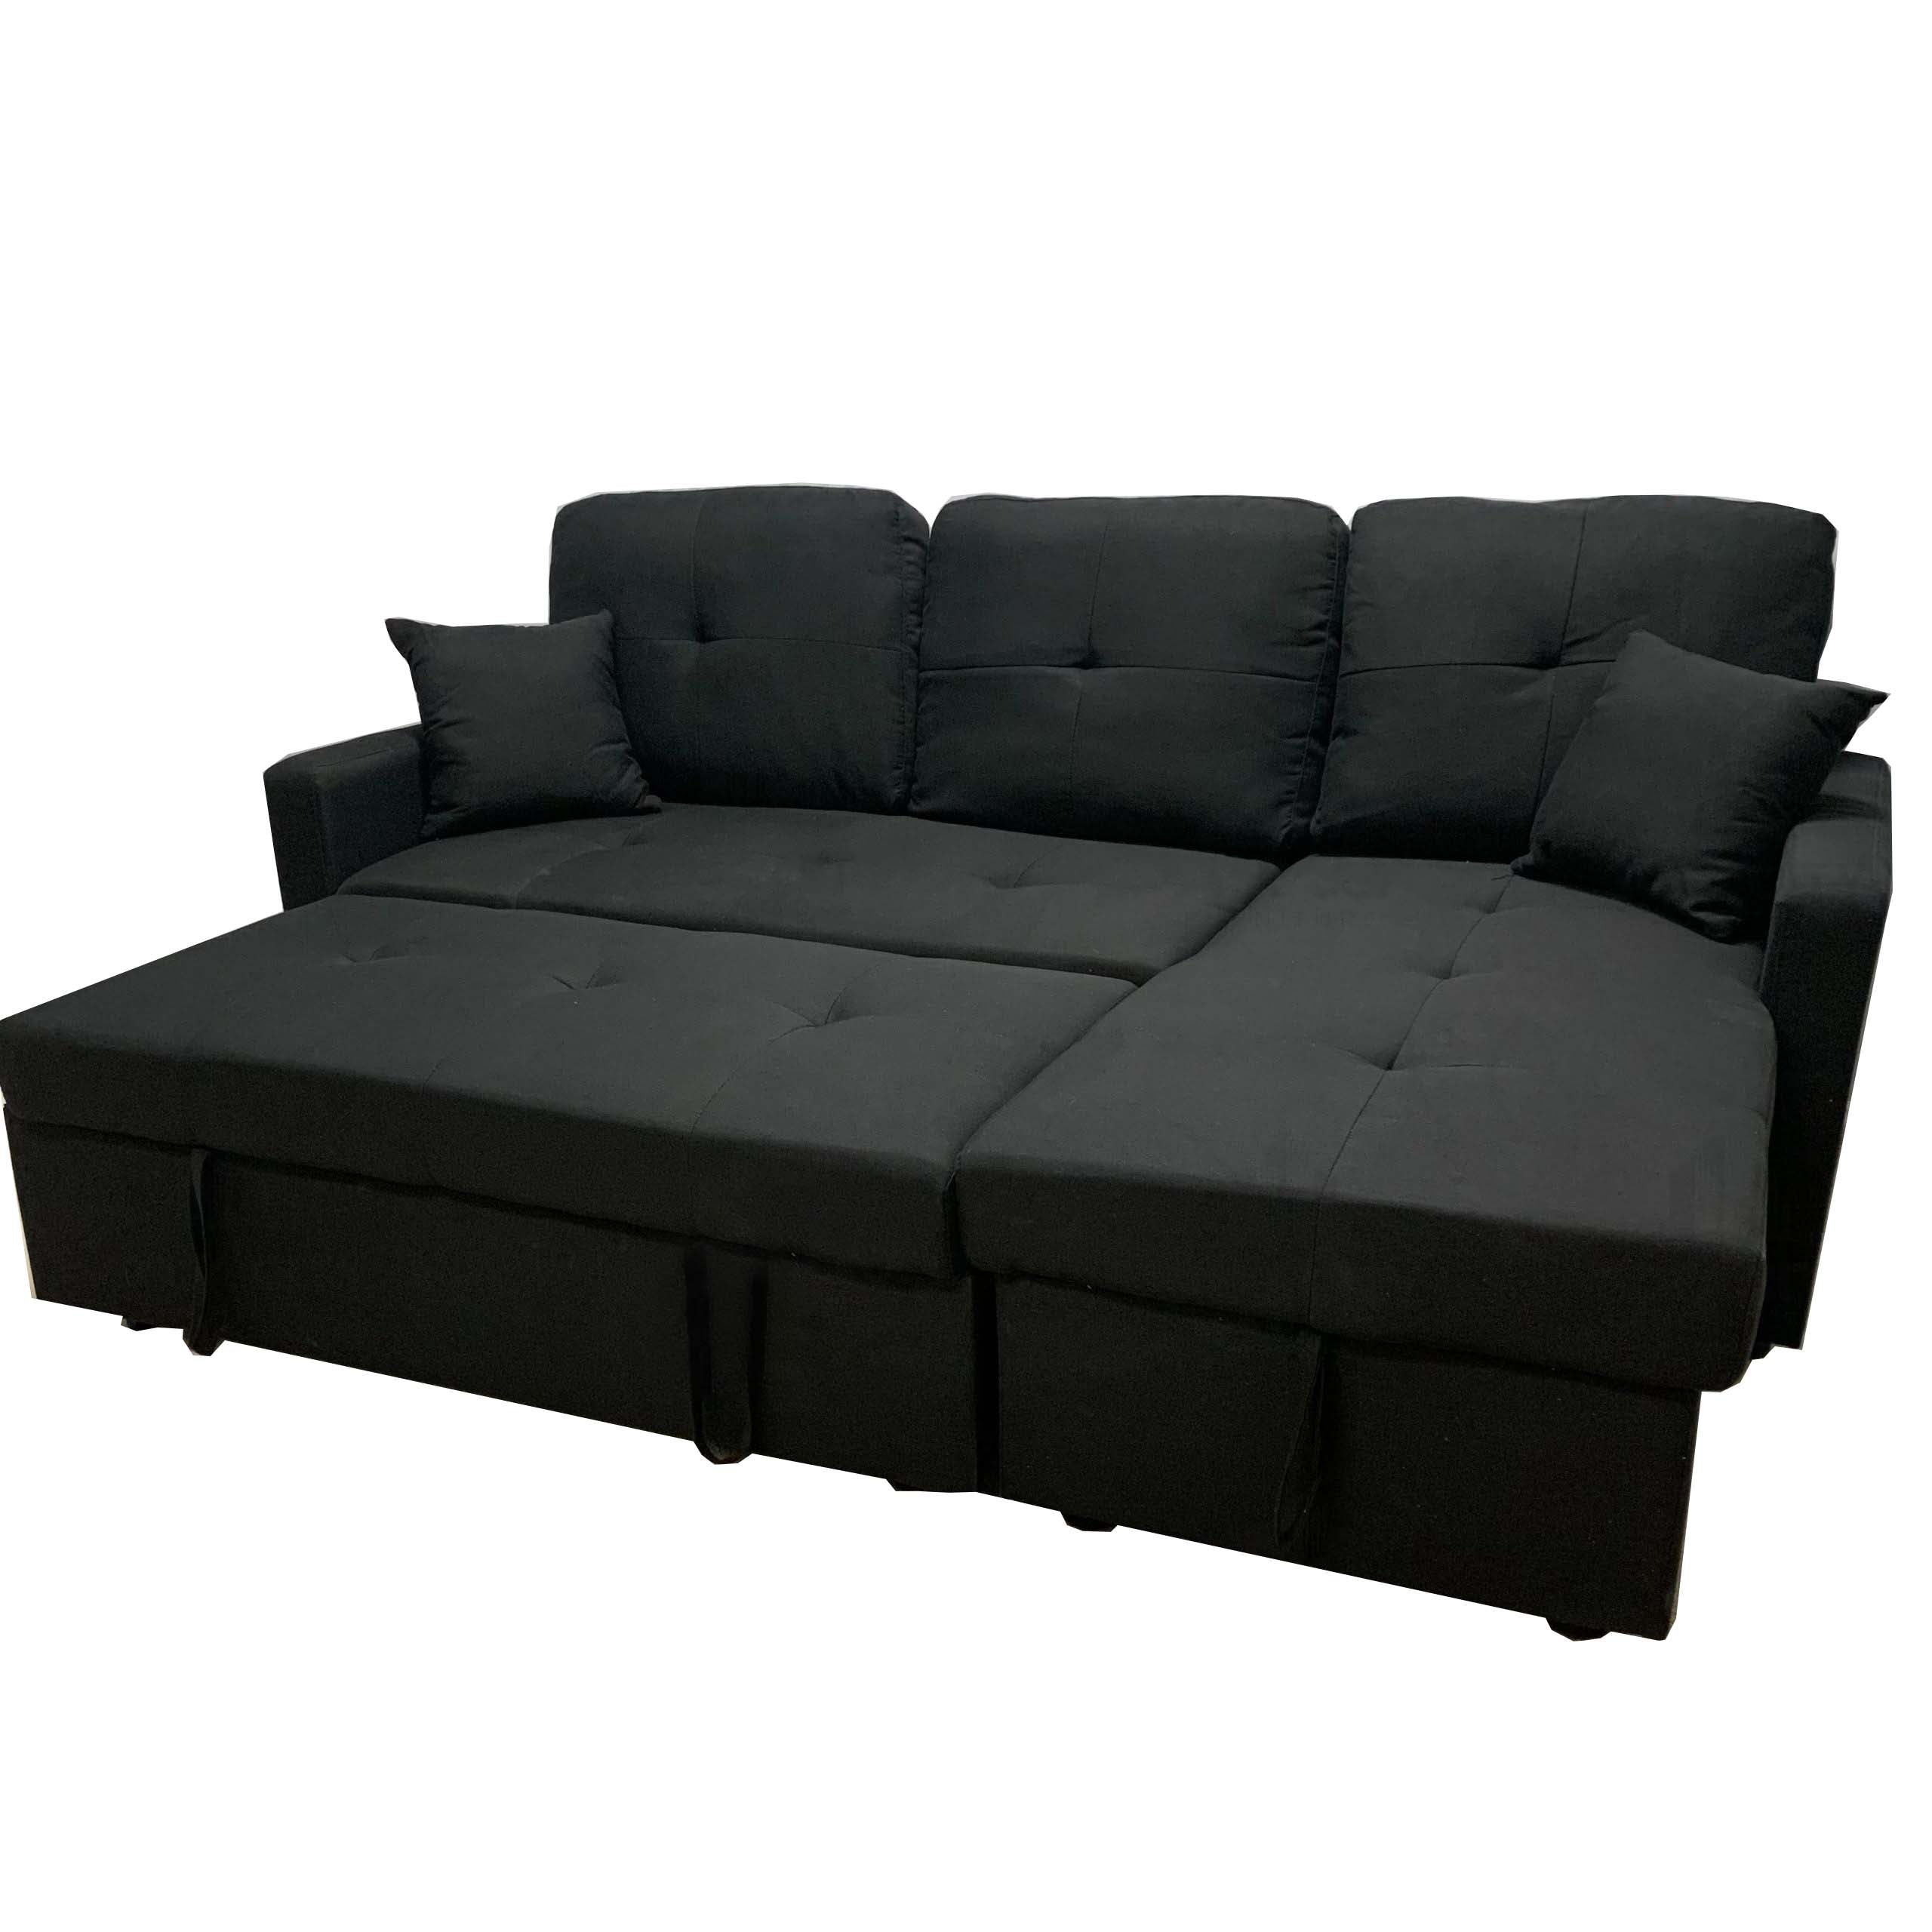 Reversible Black Fabric Pull Out Sectional Sofa Bed With Storage 1866